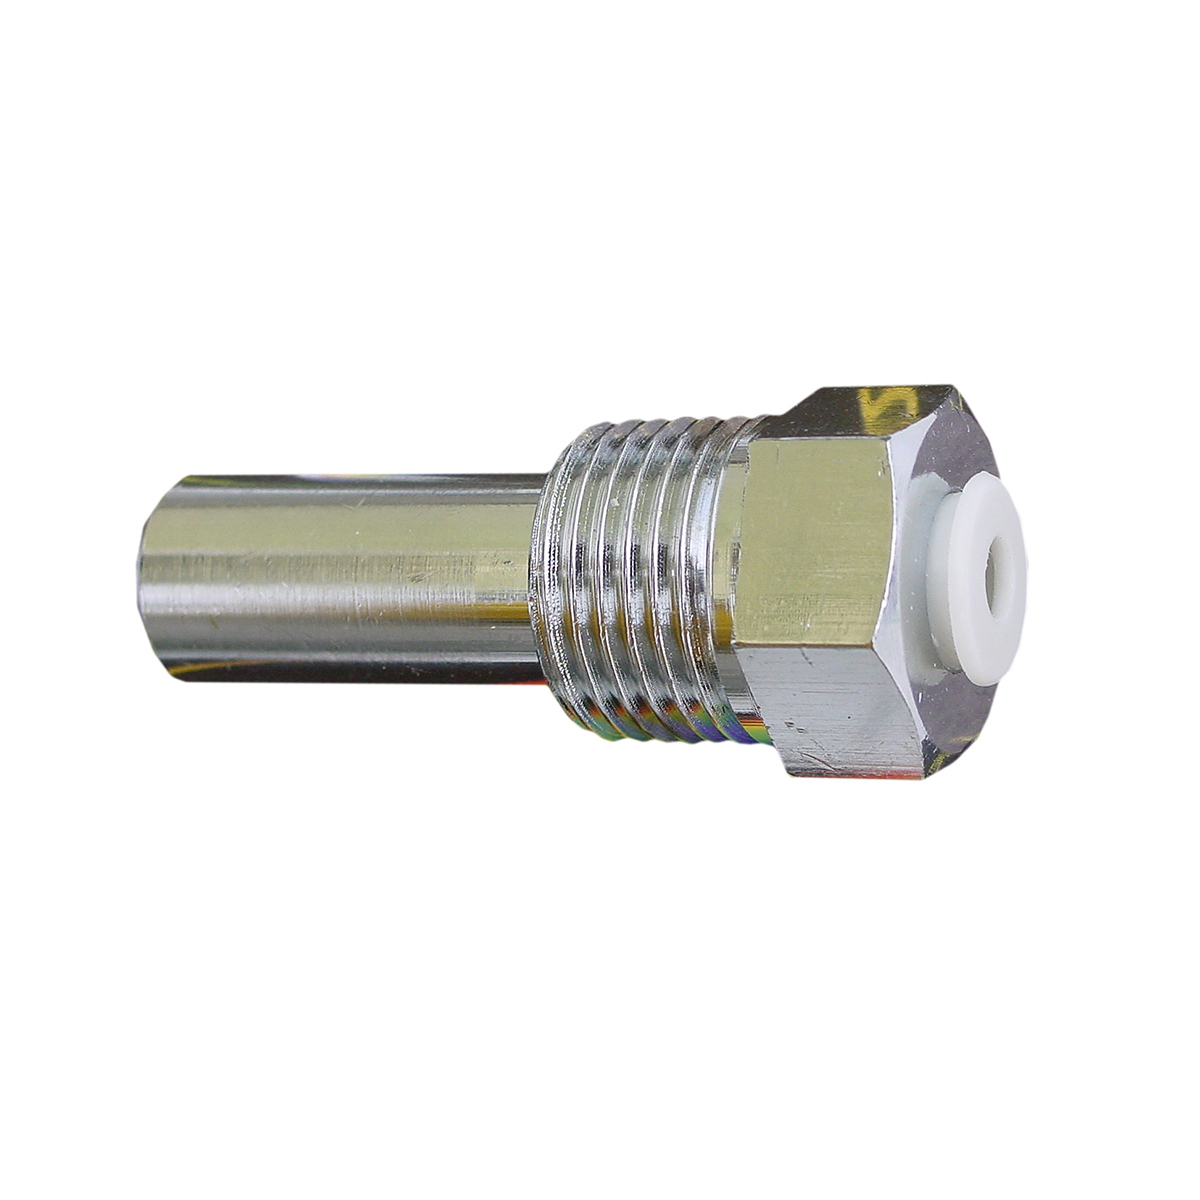 Chrome-plated and nickel-plated brass immersion sleeve, ½ “ AG, 30 mm immersion depth Chrome-plated and nickel-plated brass immersion sleeve, ½ “ AG, 30 mm immersion depth